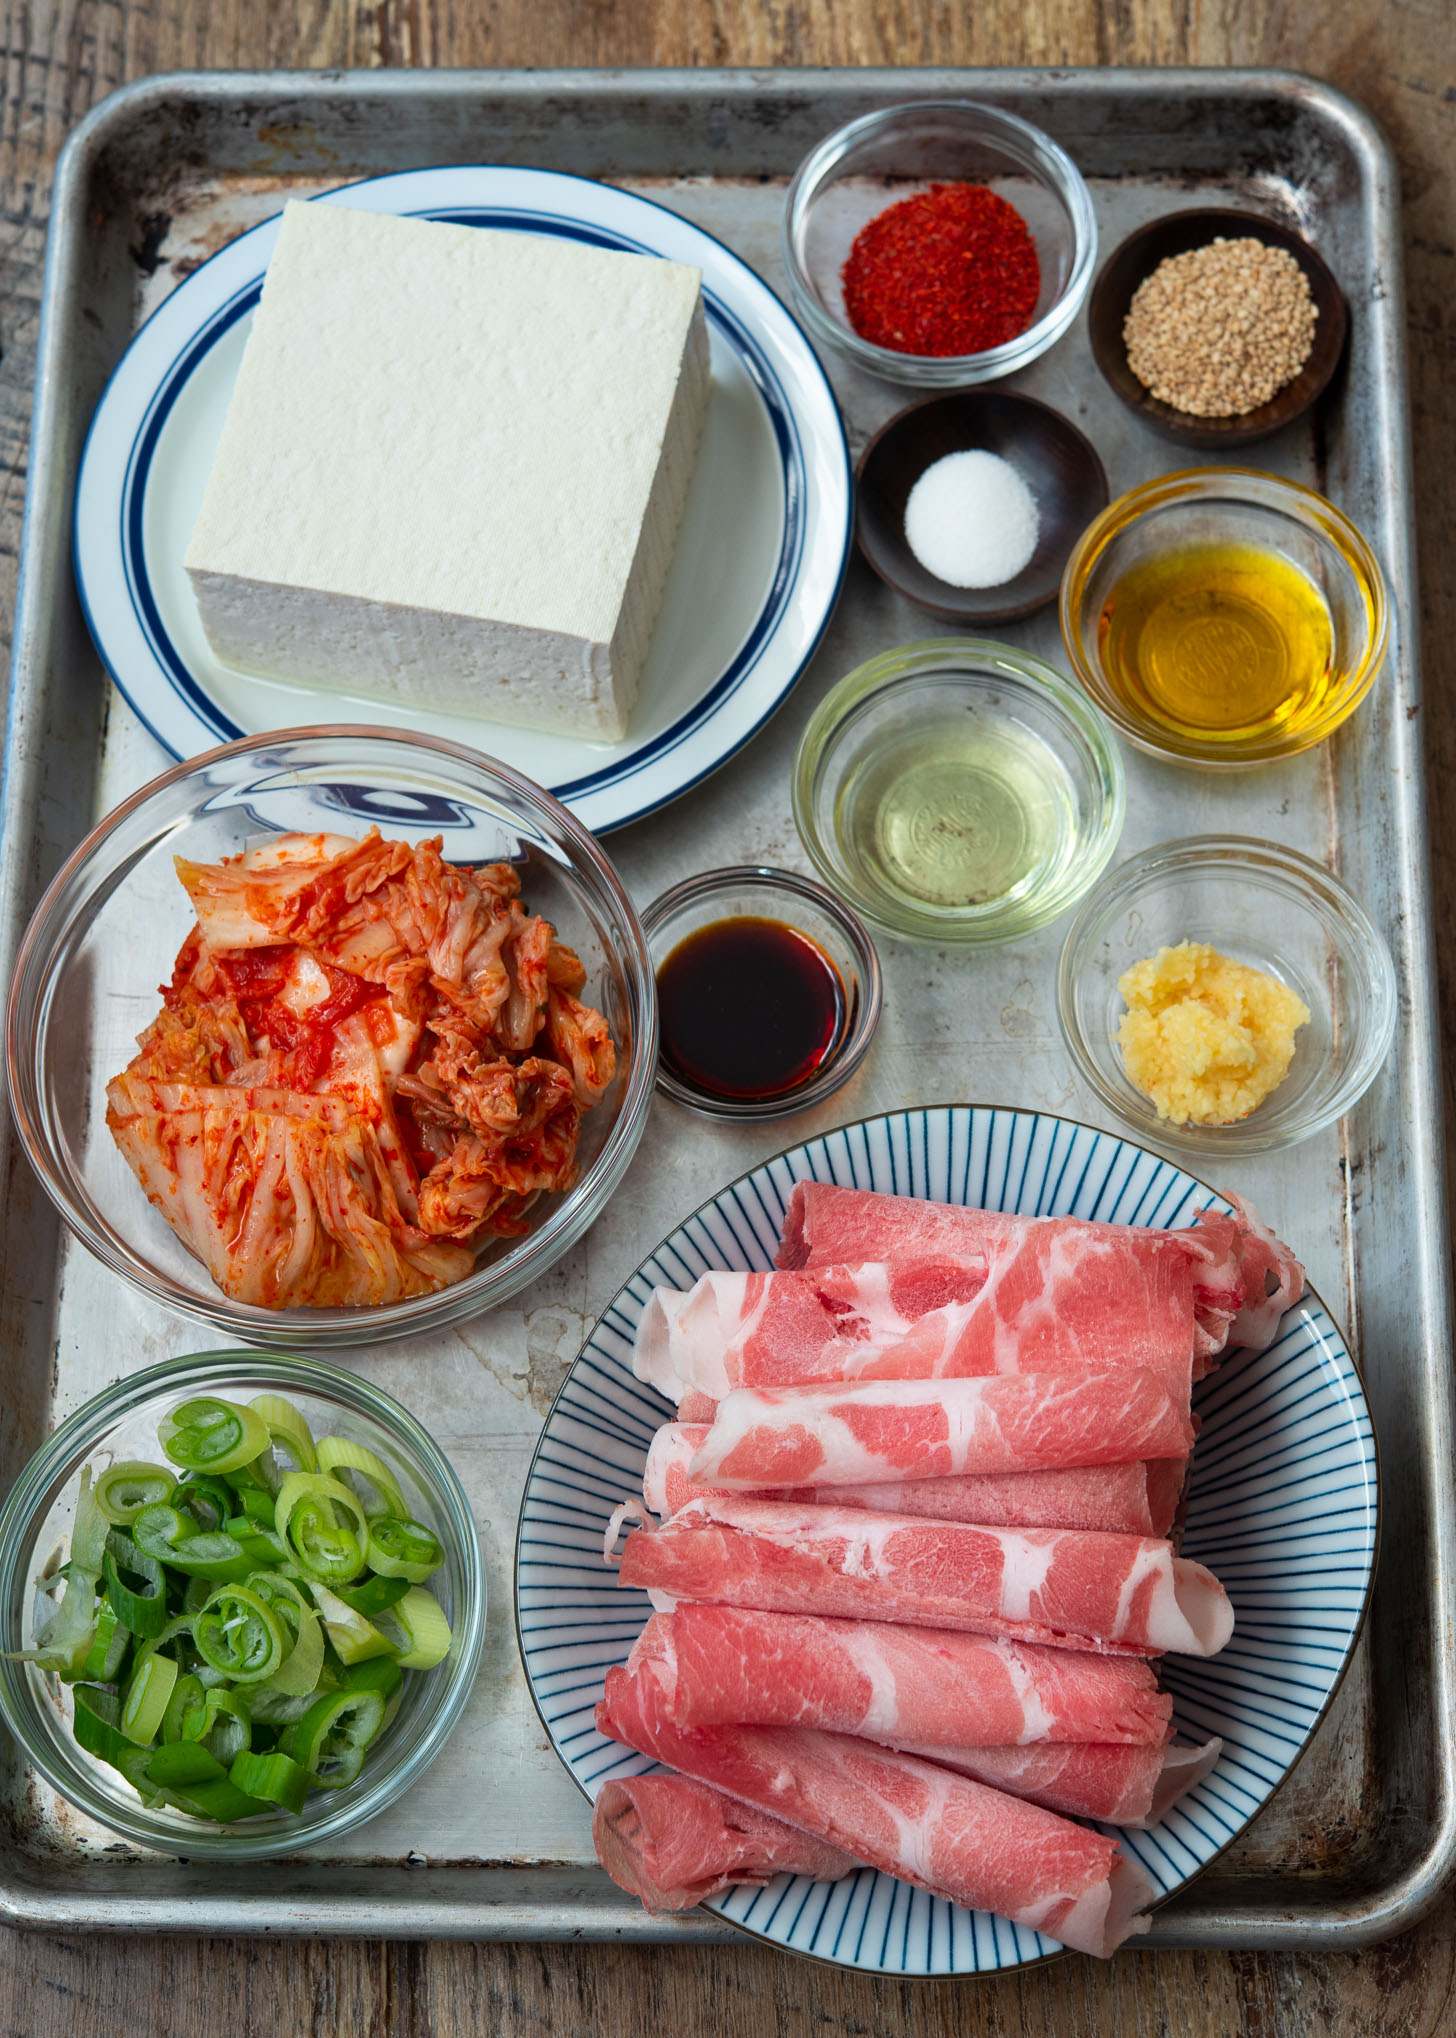 Ingredients for making dubu kimchi are presented together.